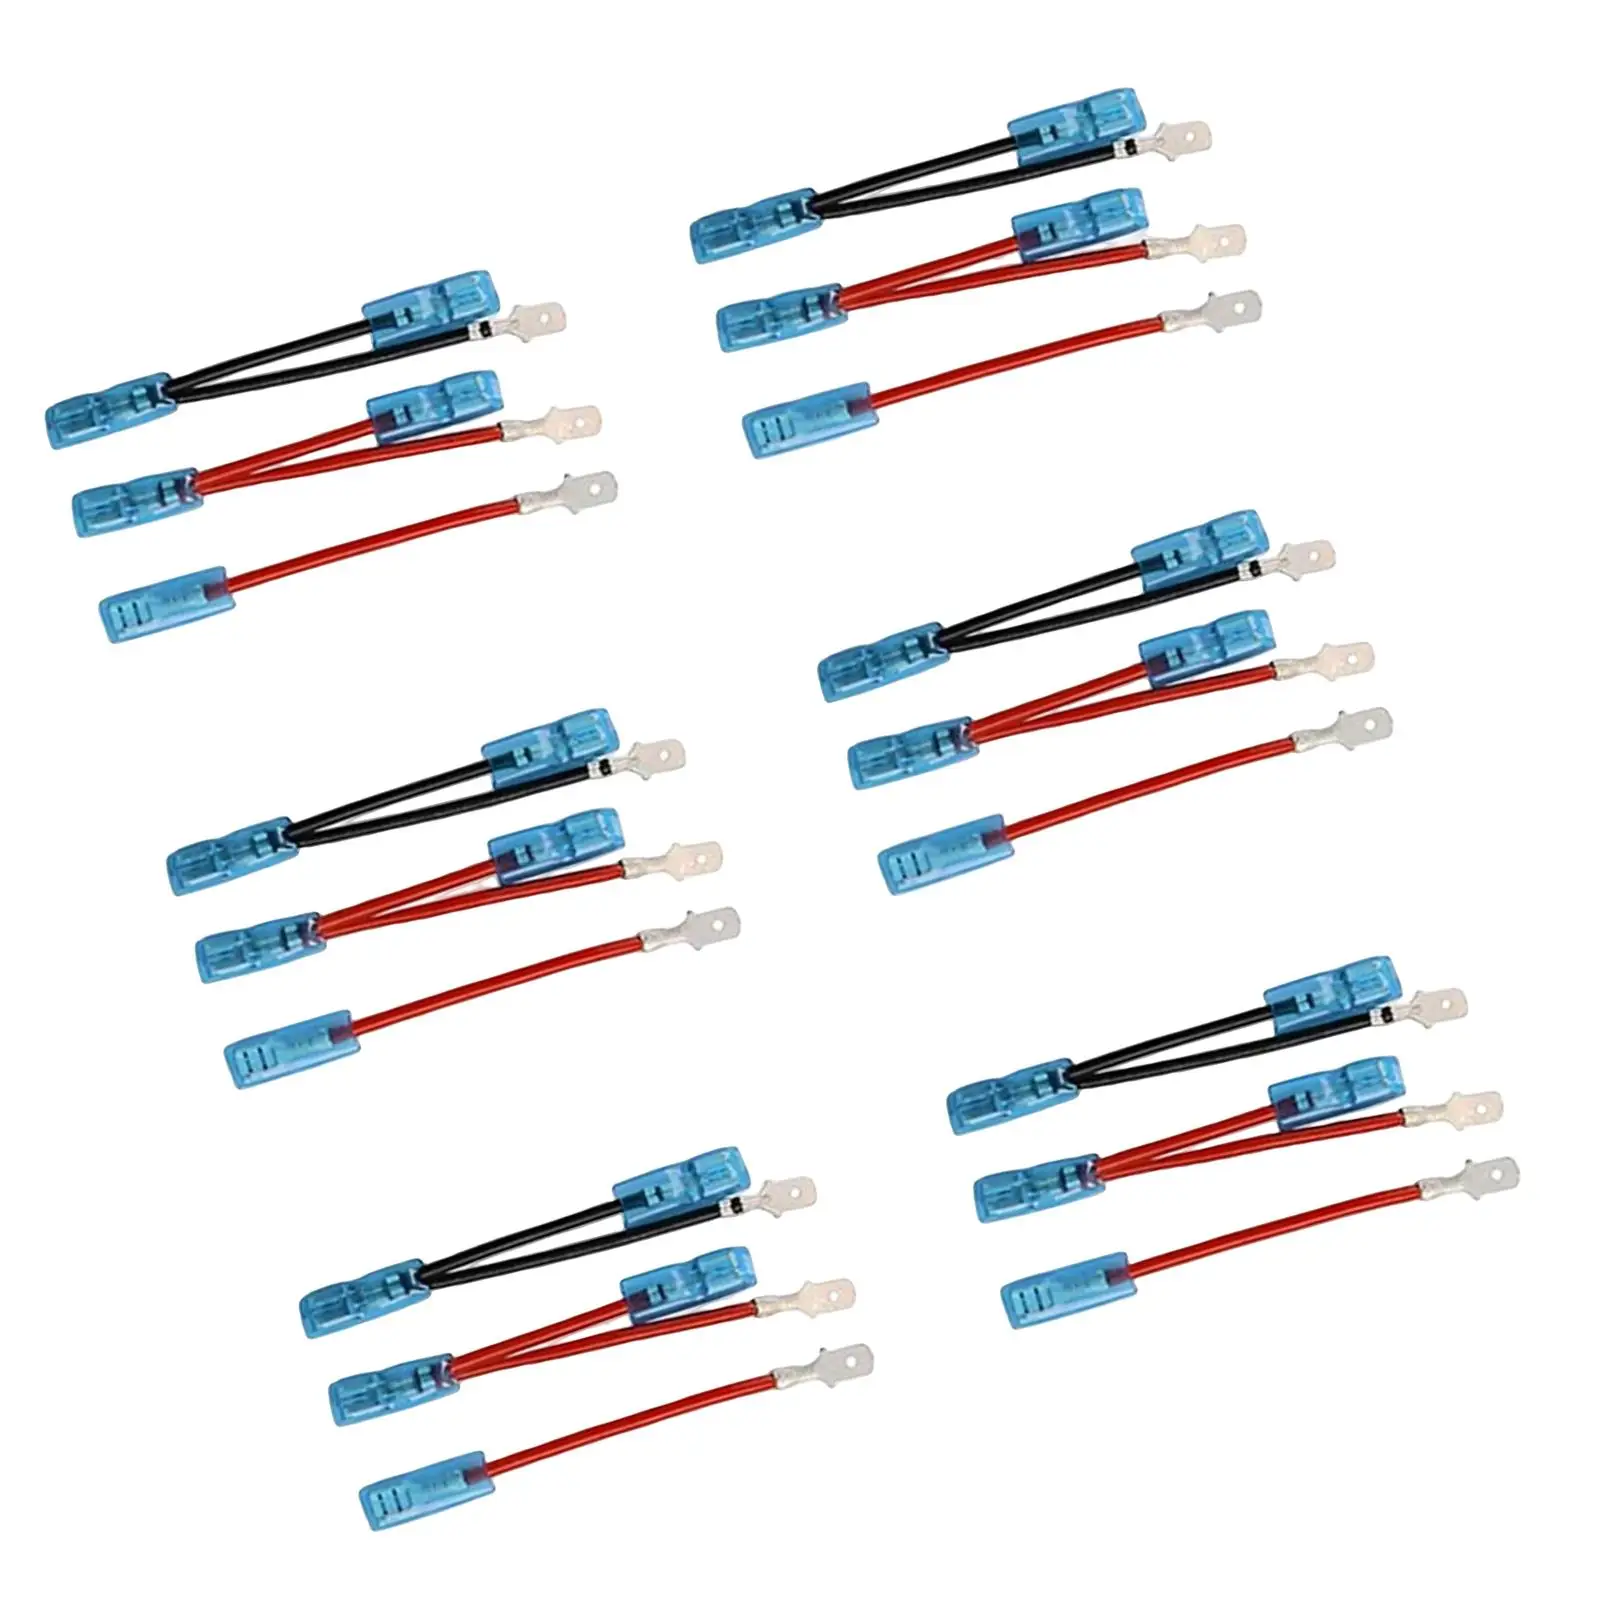 6Pcs 5 Pin Rocker Switch Jumper Wires Set Easy to Install with Male Female Terminal Portable Parts for UTV Trucks Yachts